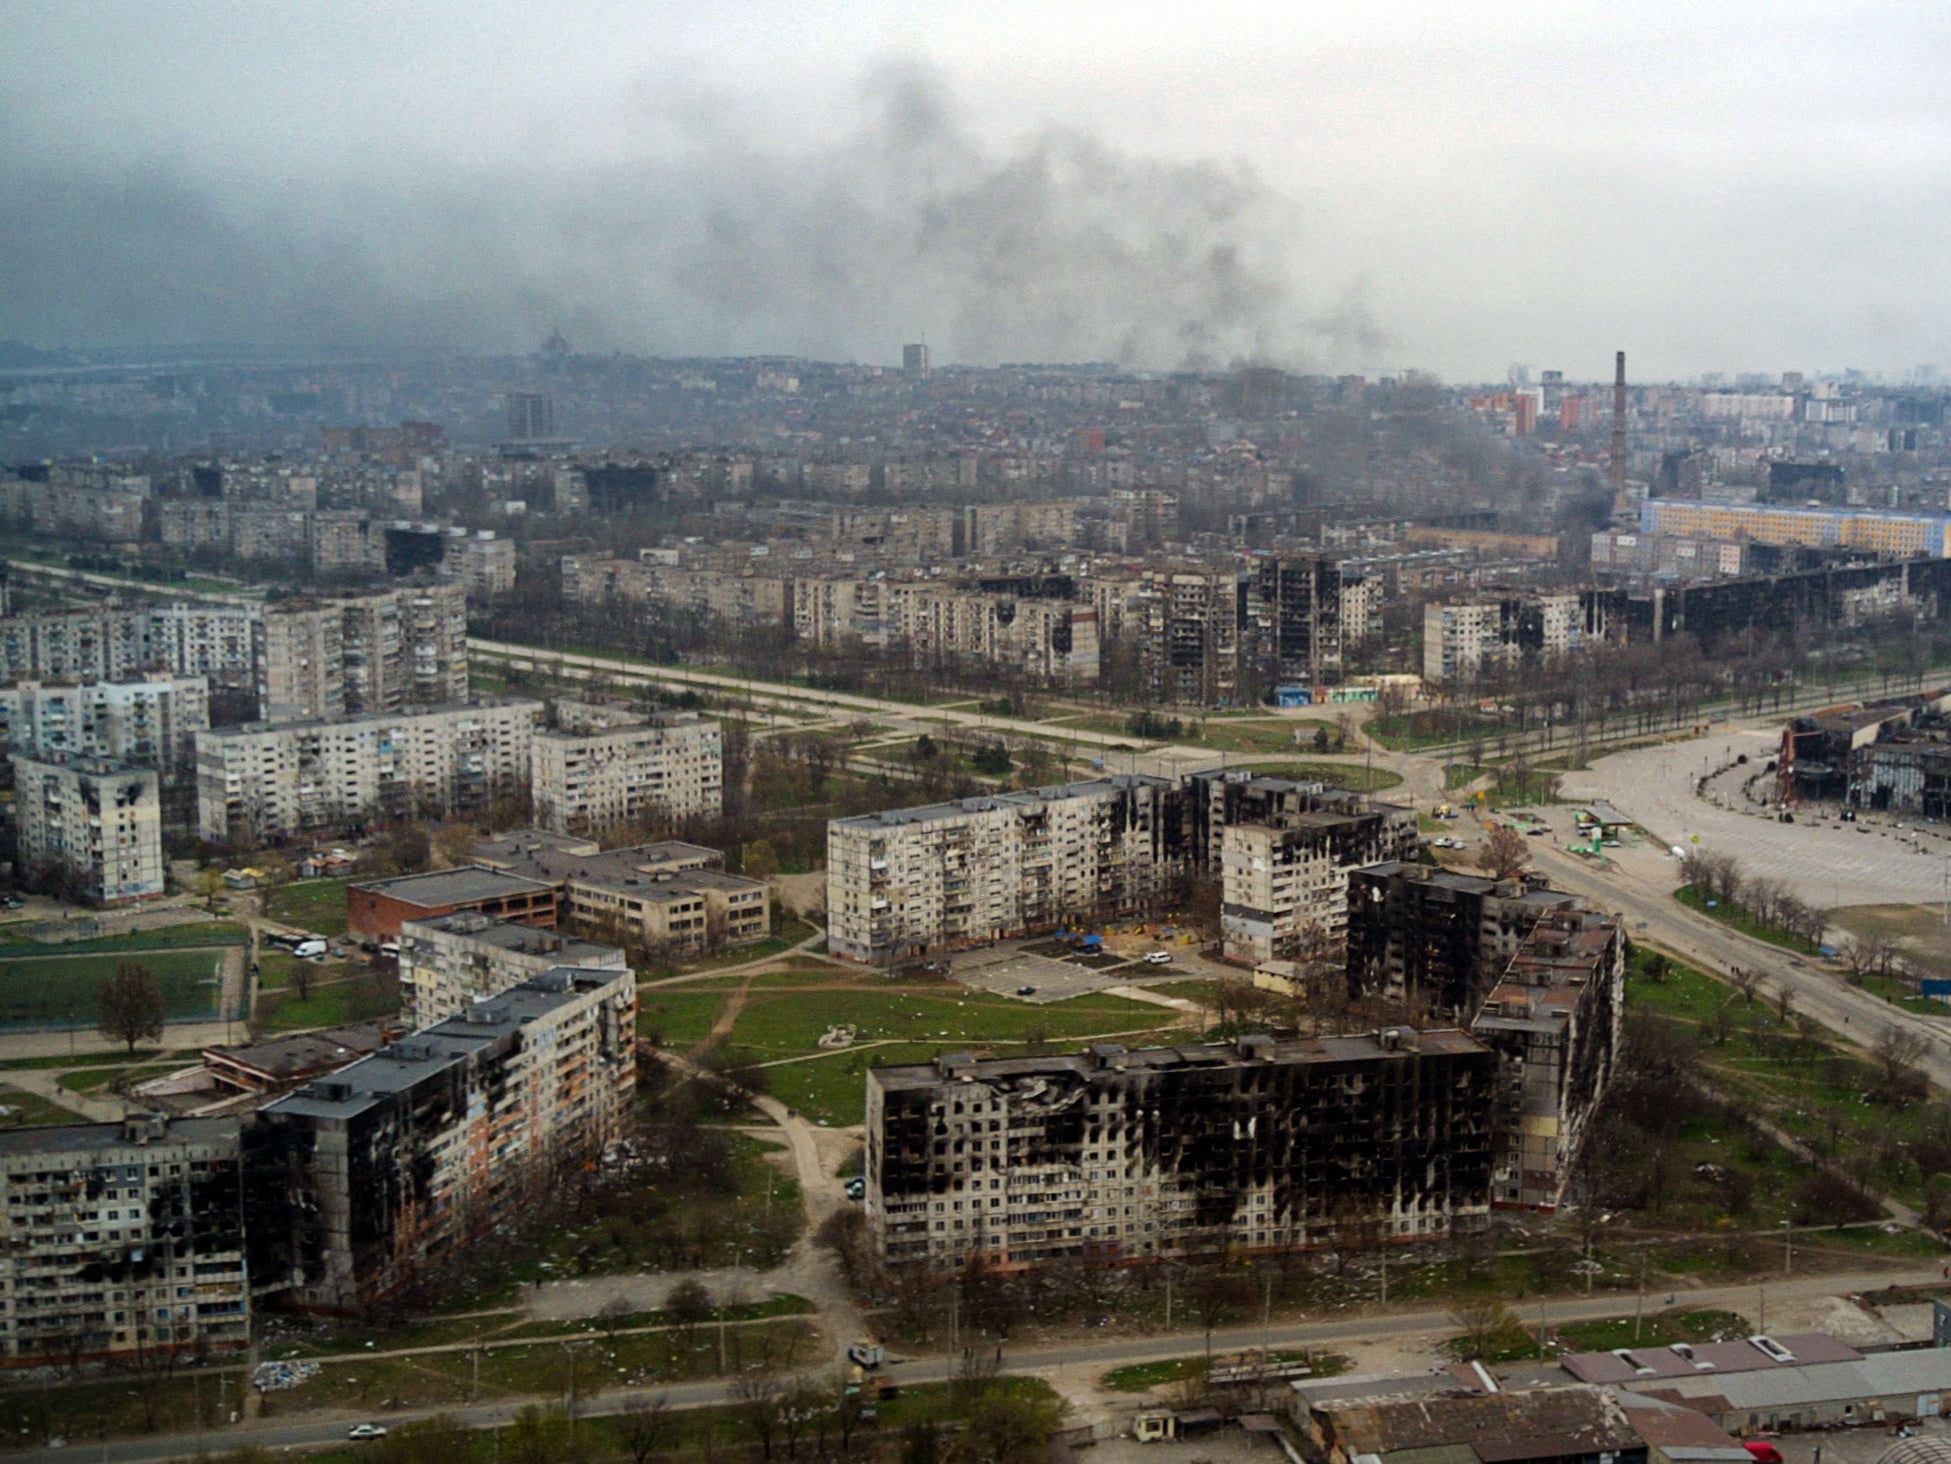 The city of Mariupol pictured during Russia’s onslaught, days after Konstantin Ivaschenko assumed the mayoralty